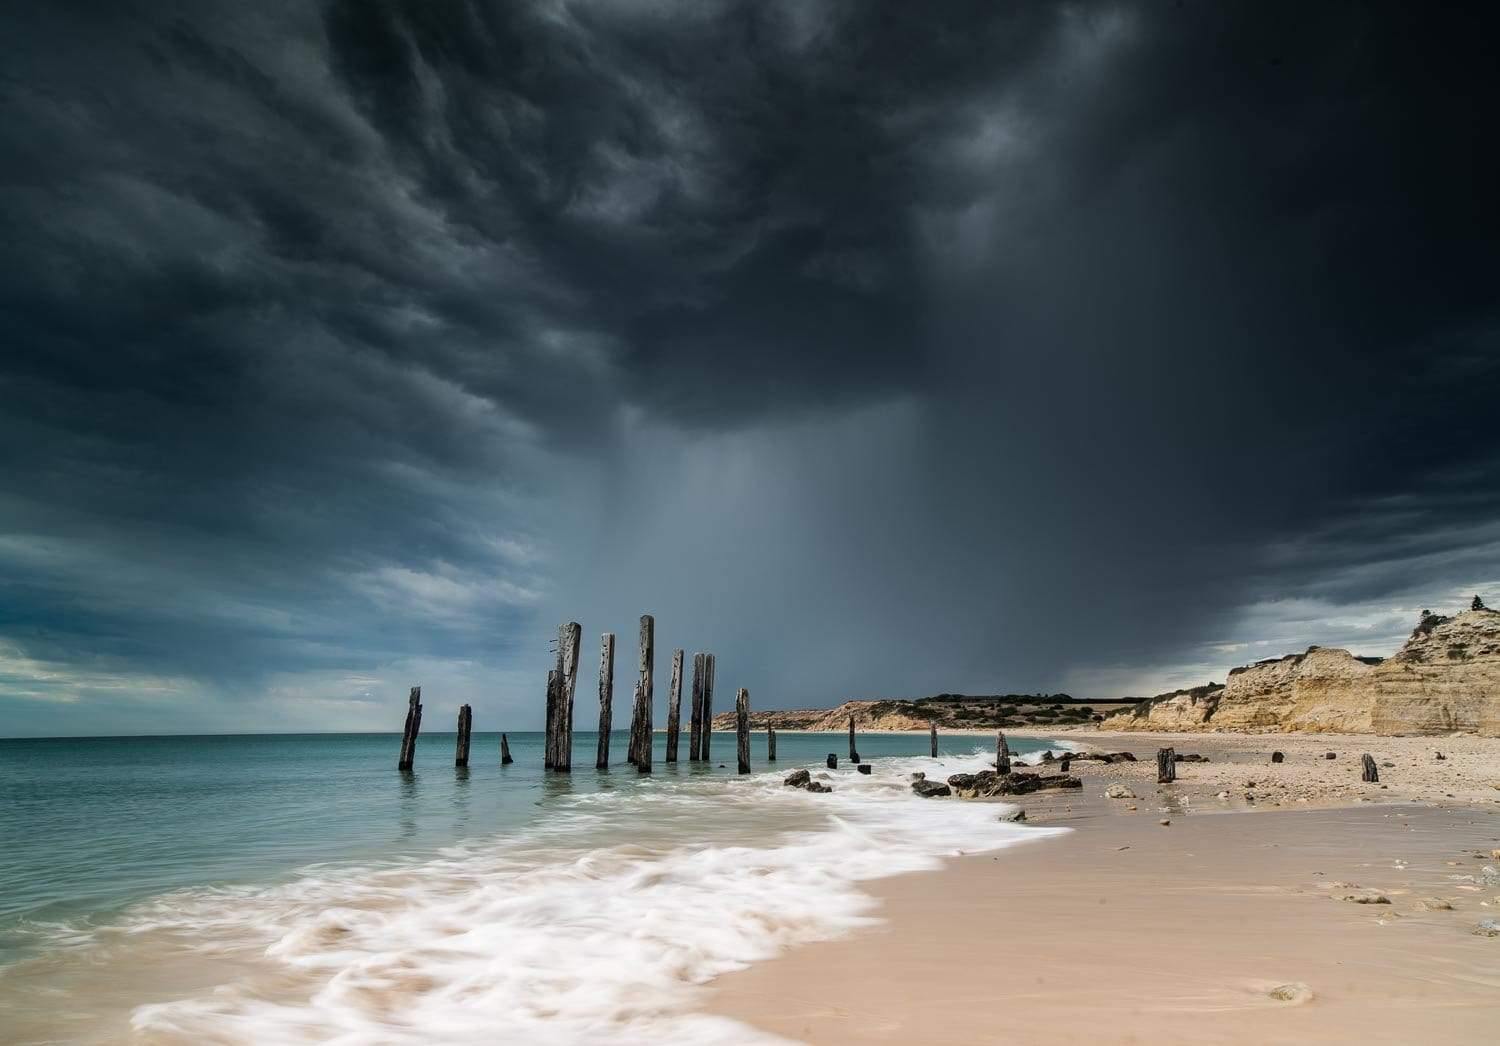 A sequence of long woody pillars standing in the water on the seashore with dark black clouds over them and some rocks in the right top corner, Blackened Skies Willunga SA Artwork